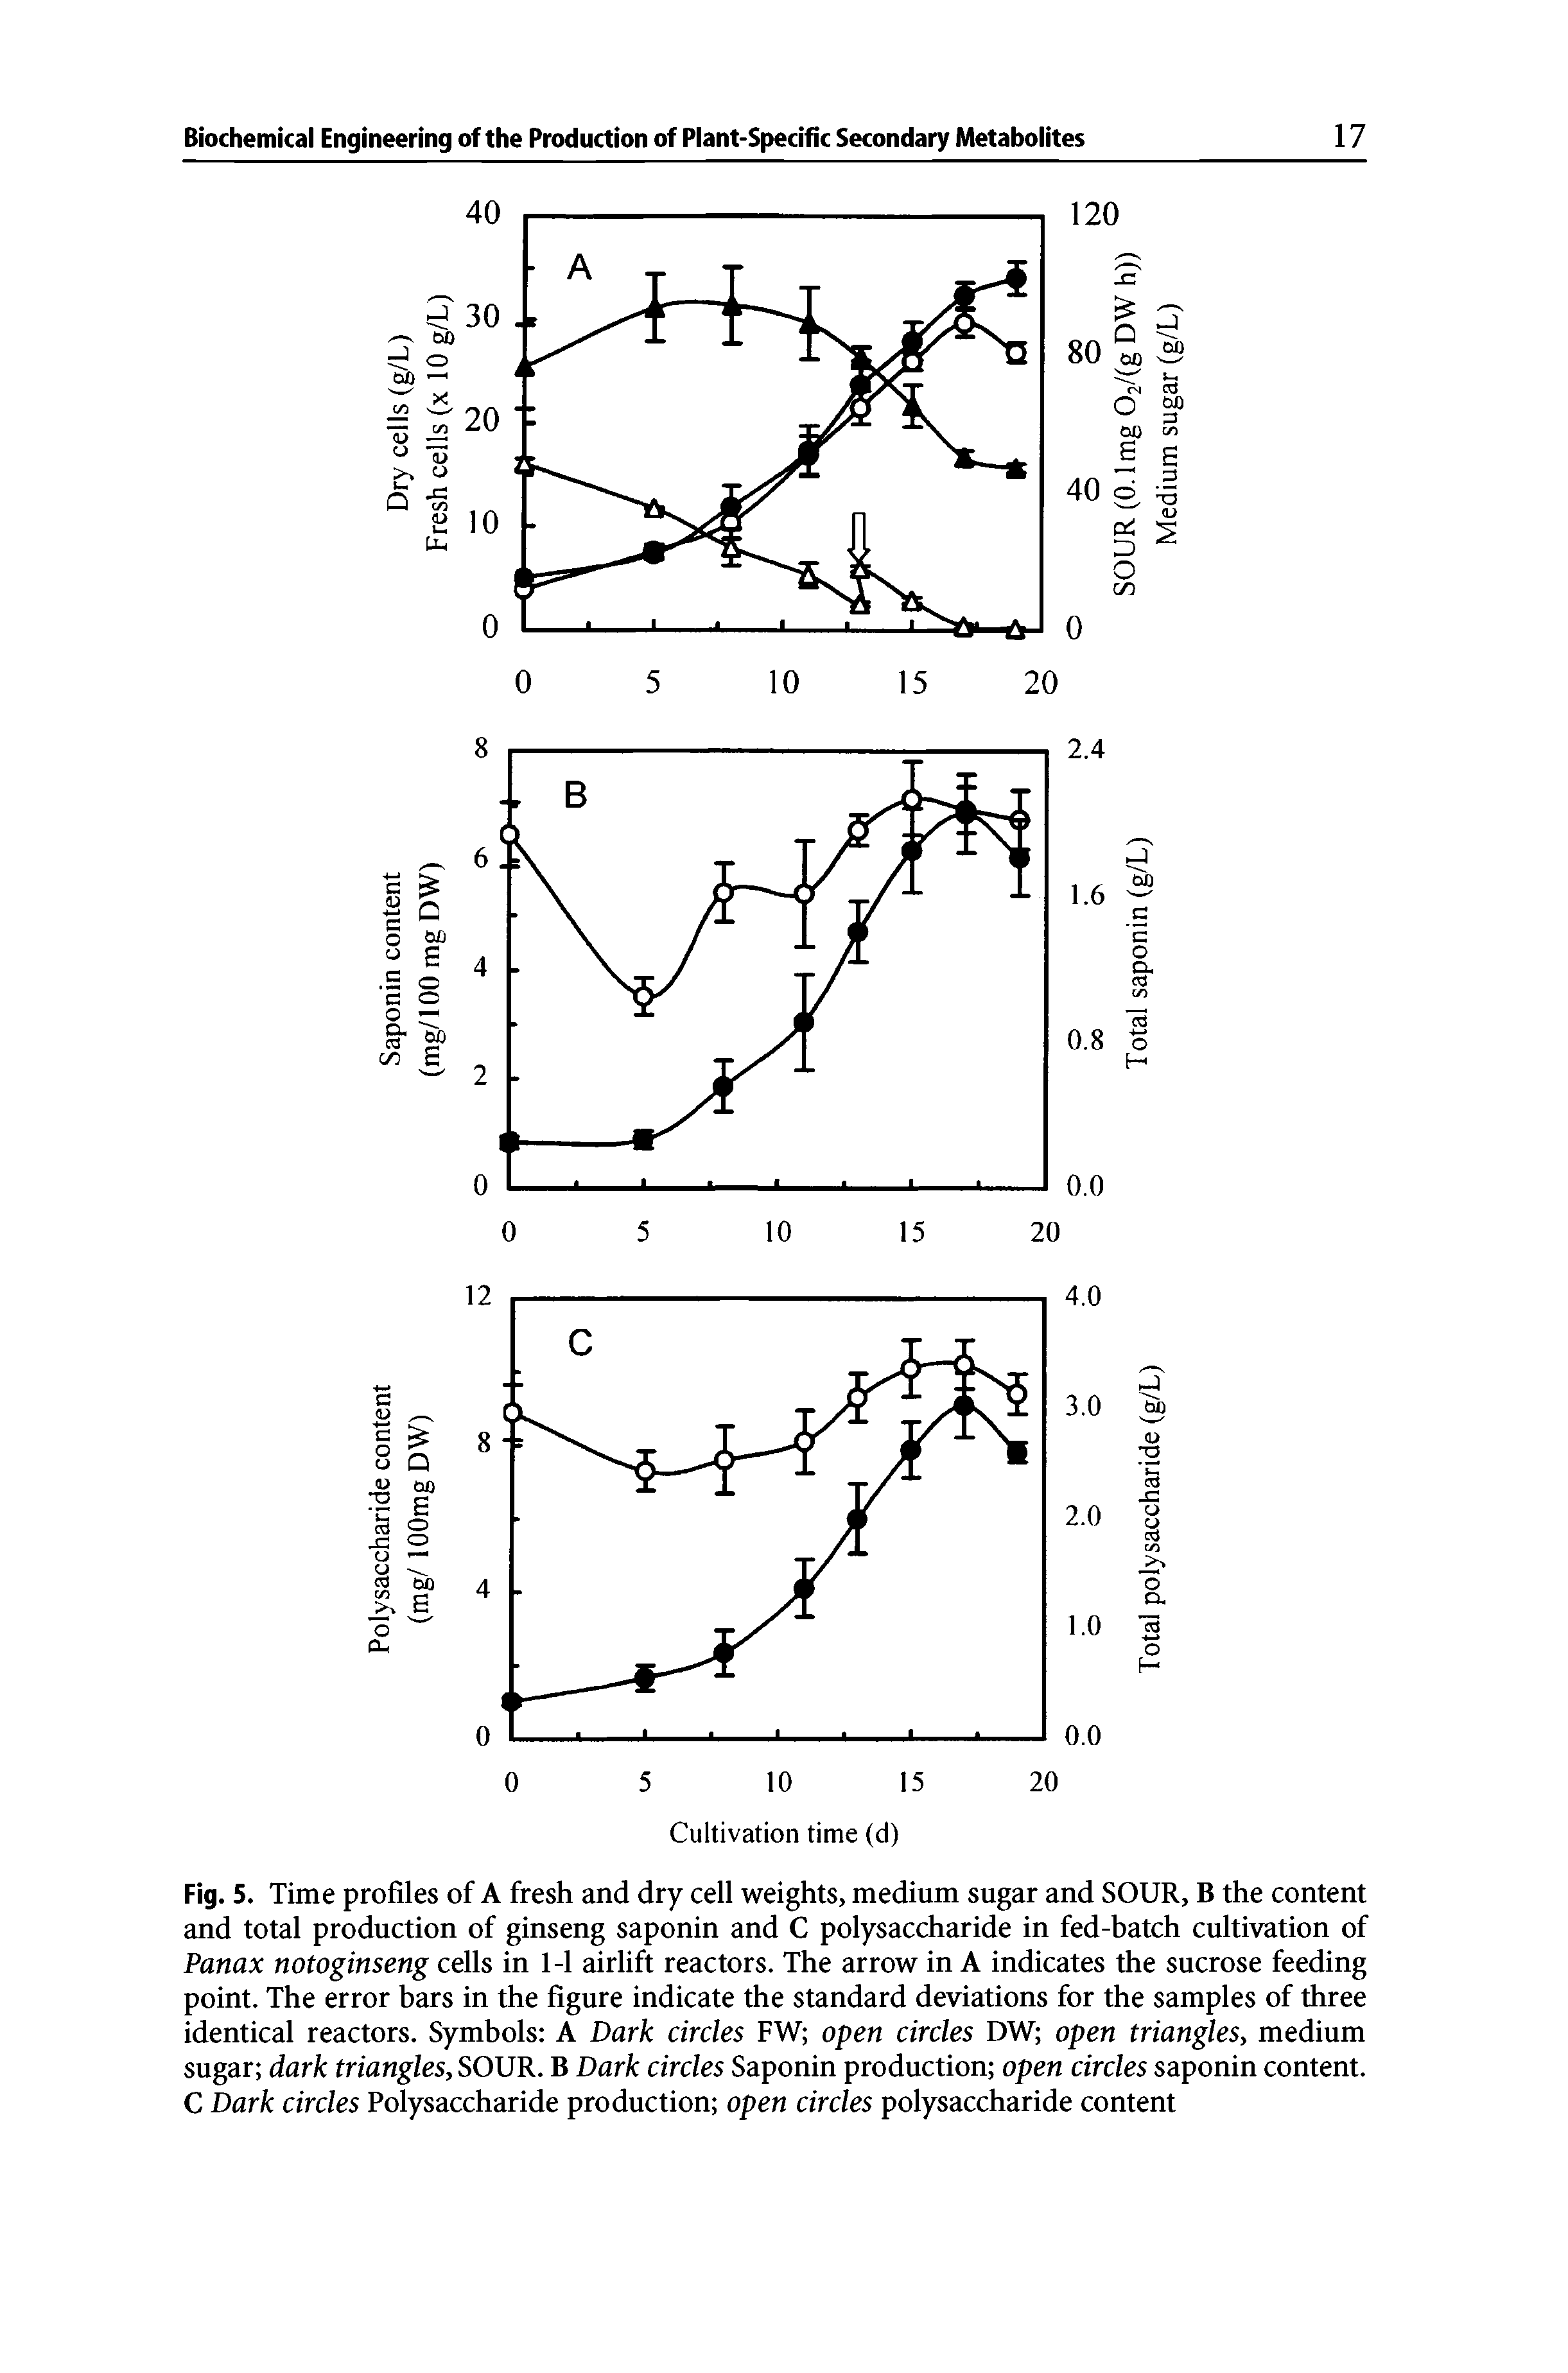 Fig. 5. Time profiles of A fresh and dry cell weights, medium sugar and SOUR, B the content and total production of ginseng saponin and C polysaccharide in fed-batch cultivation of Panax notoginseng cells in 1-1 airlift reactors. The arrow in A indicates the sucrose feeding point. The error bars in the figure indicate the standard deviations for the samples of three identical reactors. Symbols A Dark circles FW open circles DW open triangles, medium sugar dark triangles, SOUR. B Dark circles Saponin production open circles saponin content. C Dark circles Polysaccharide production open circles polysaccharide content...